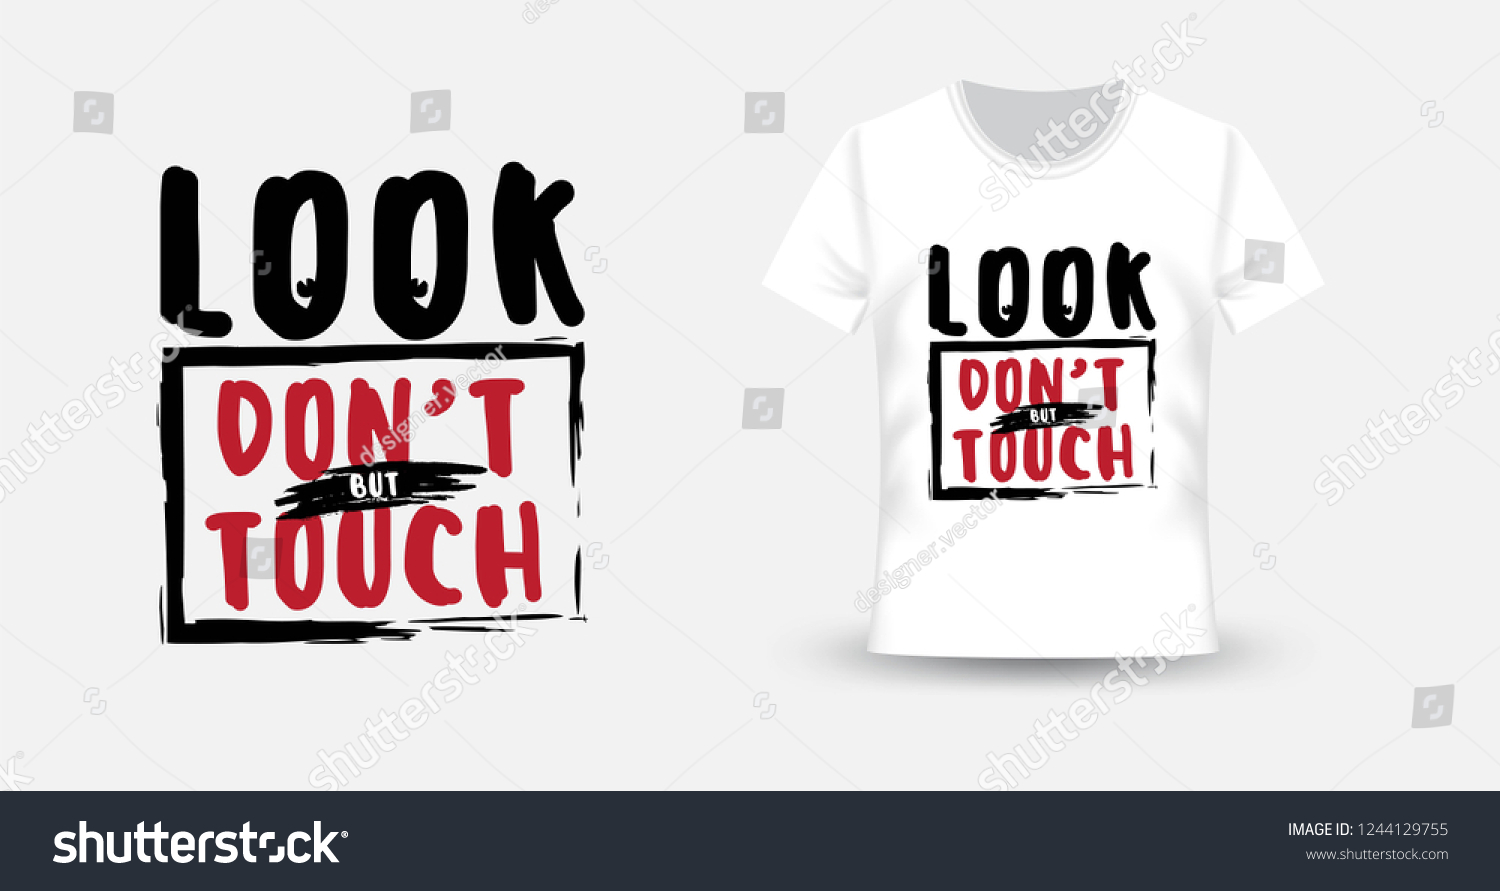 But touch look dont